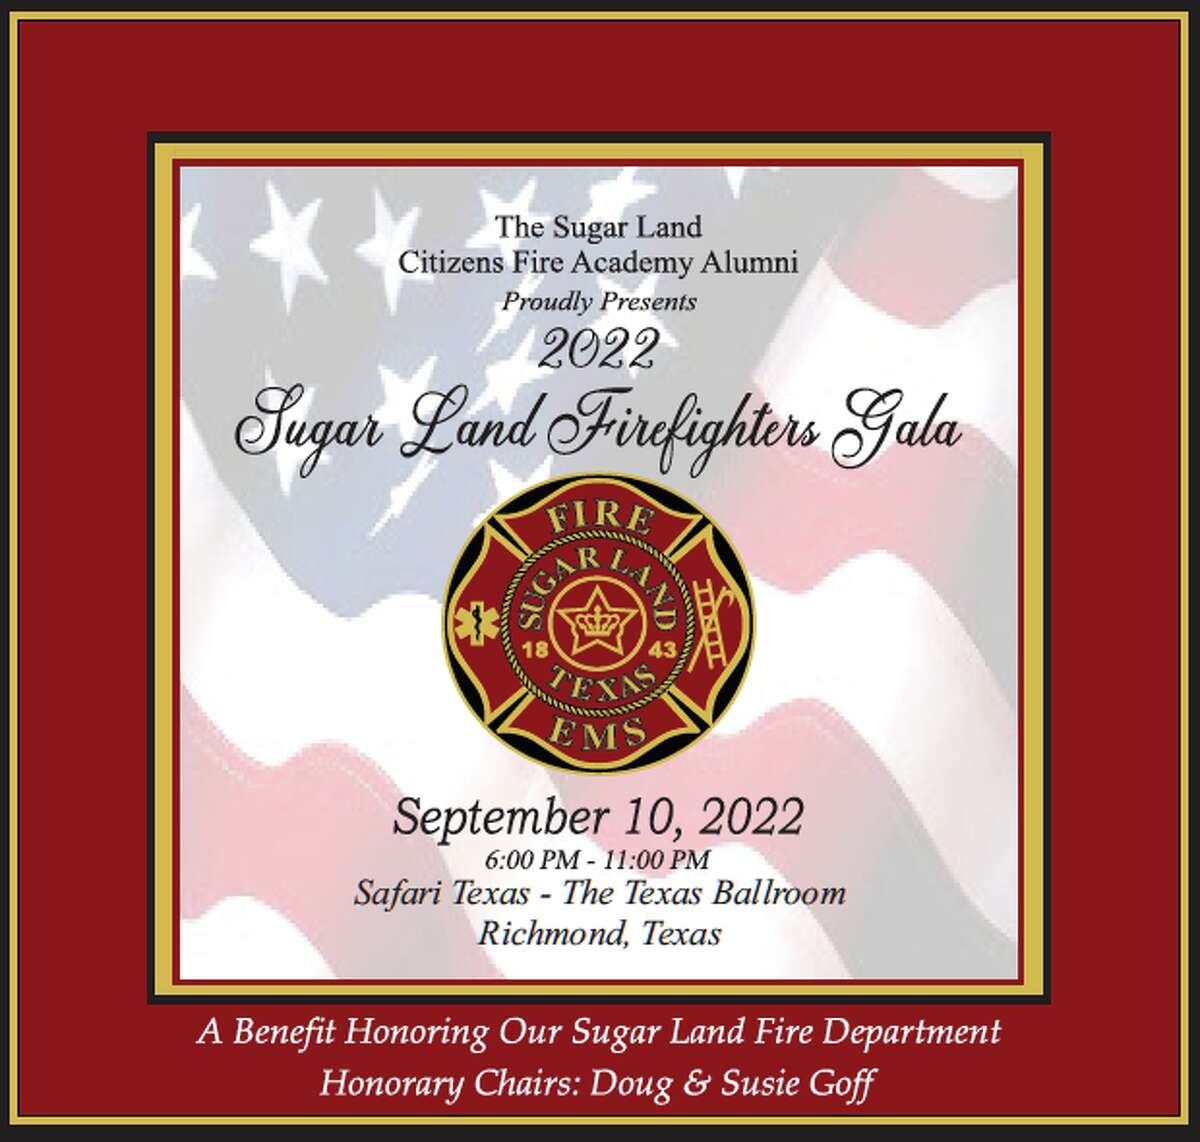 The Sugar Land Citizens Fire Academy Auxiliary Association will host its second Sugar Land Firefighter’s Gala at 6 p.m. on Saturday, Sept. 10, 2022, at Safari Texas Ranch. 